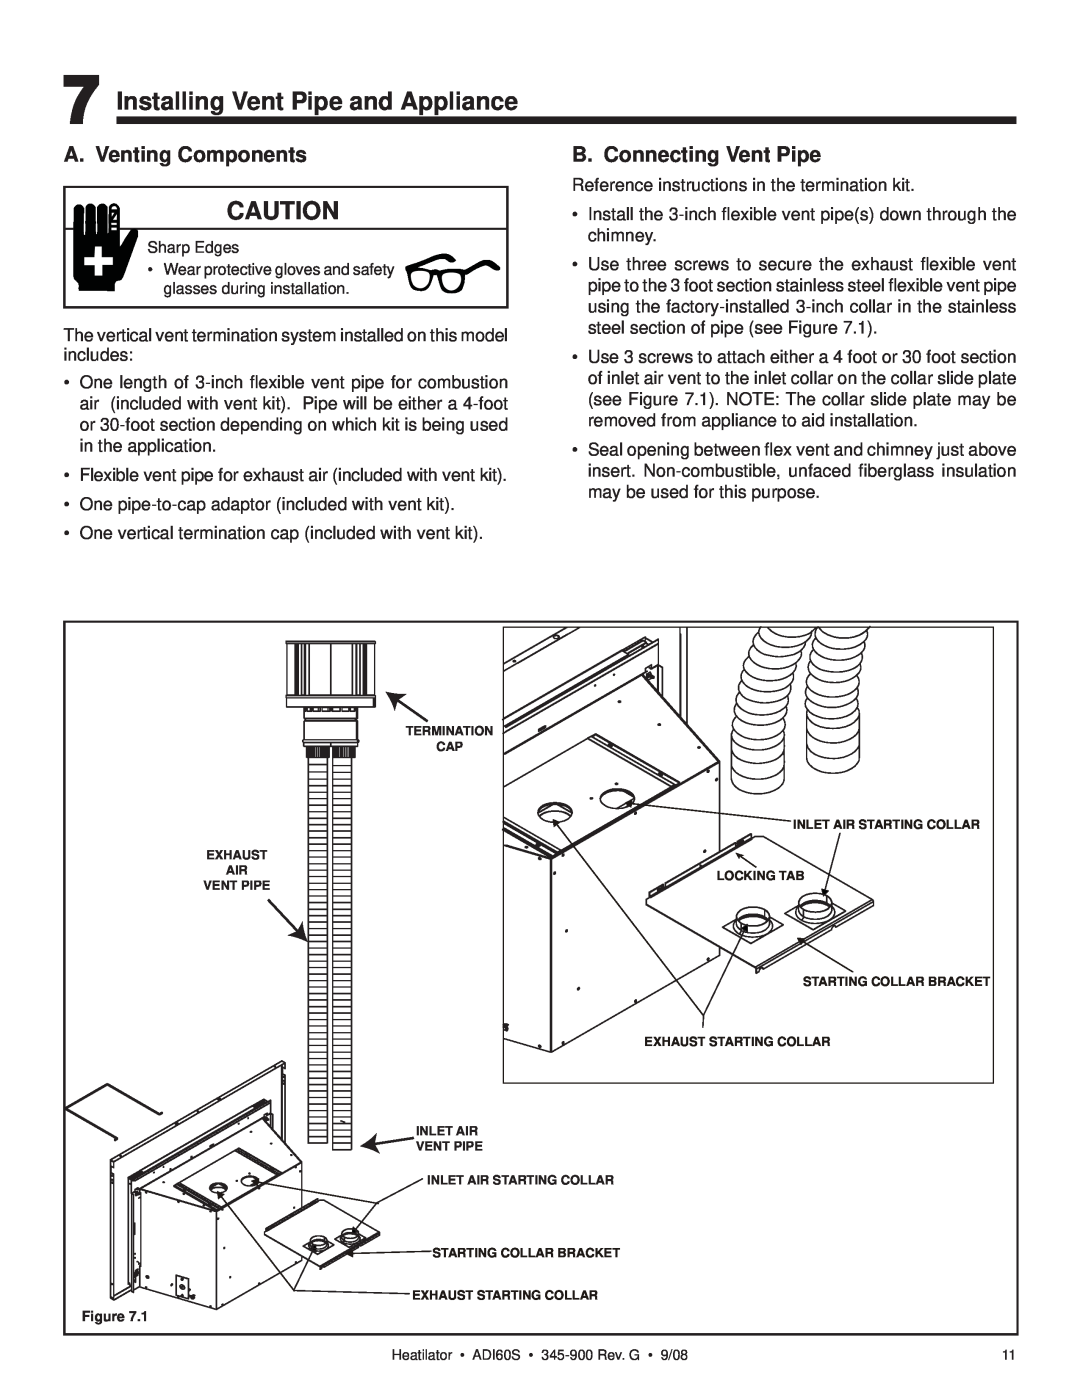 Heatiator ADI60S owner manual Installing Vent Pipe and Appliance, A. Venting Components, B. Connecting Vent Pipe 